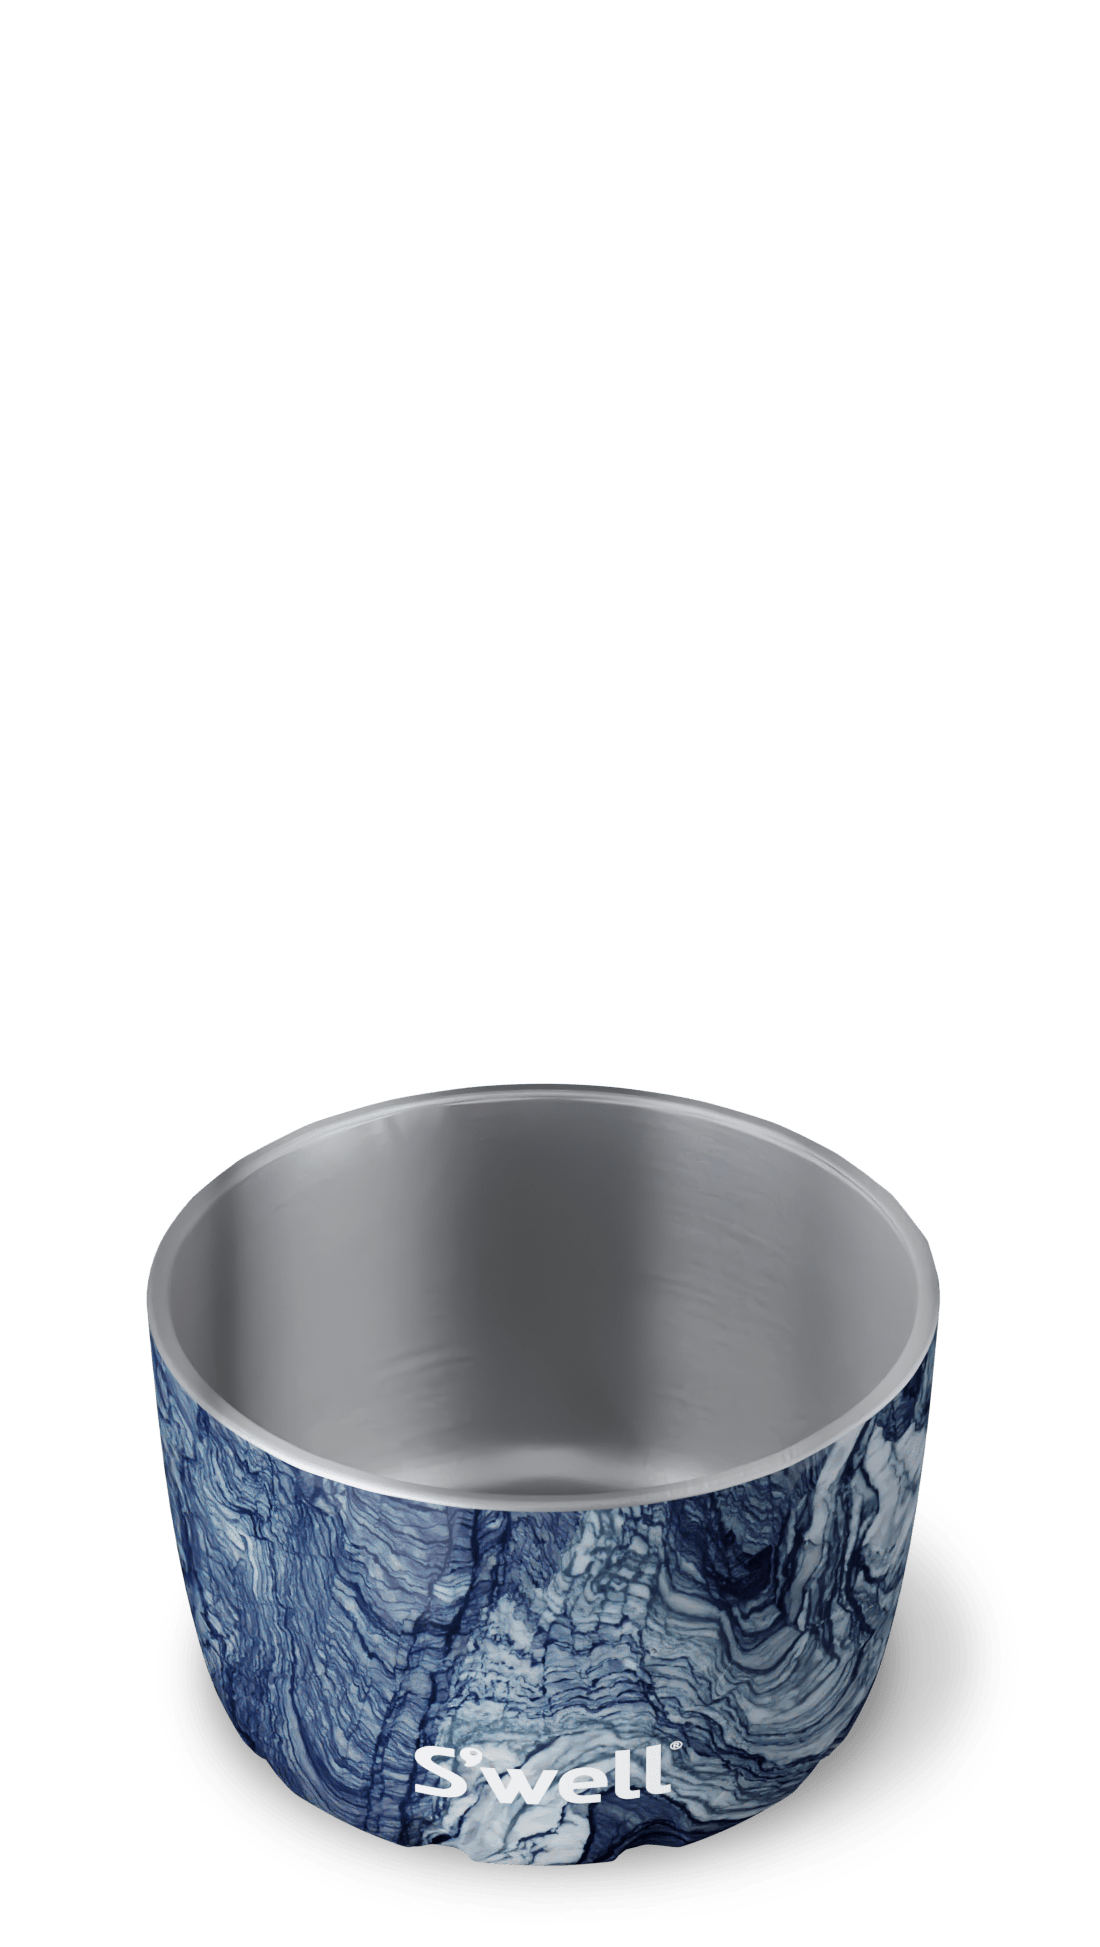 S'well Azurite Marble Bowl | 10oz | Blue | Eco-Friendly, Reusable Bowl